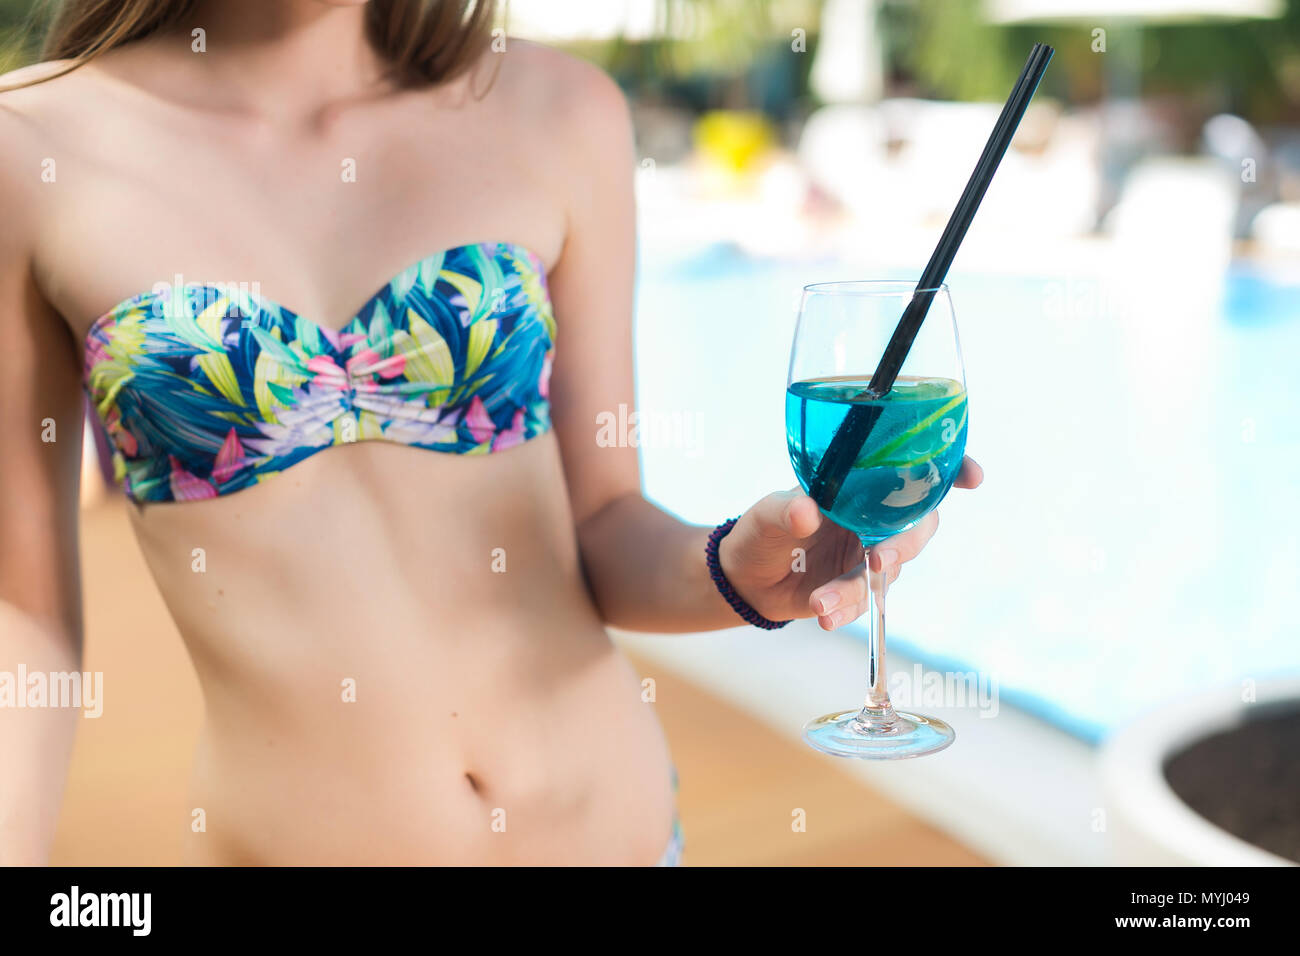 summer, vacation, holidays concept. close up of girl hand with unnatural bright blue cocktail with black straw, holden by thin elegant girl dressed in bikini in the same blue colour Stock Photo